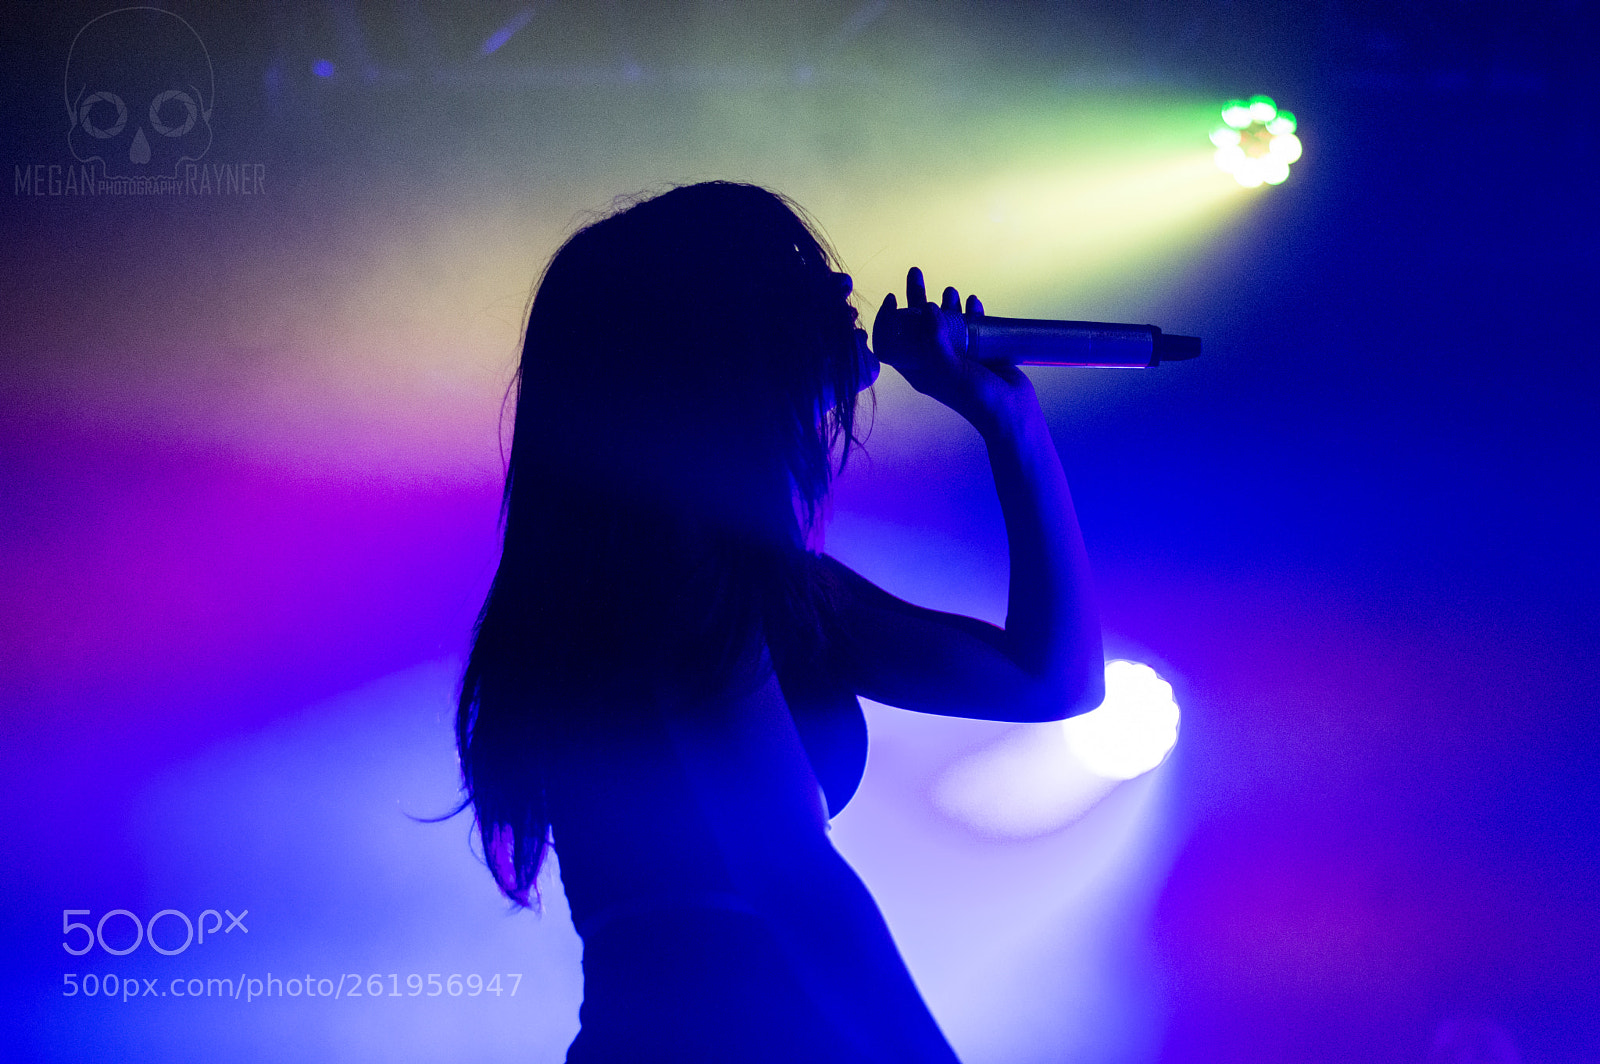 Nikon D3200 sample photo. Chrissy costanza against the photography